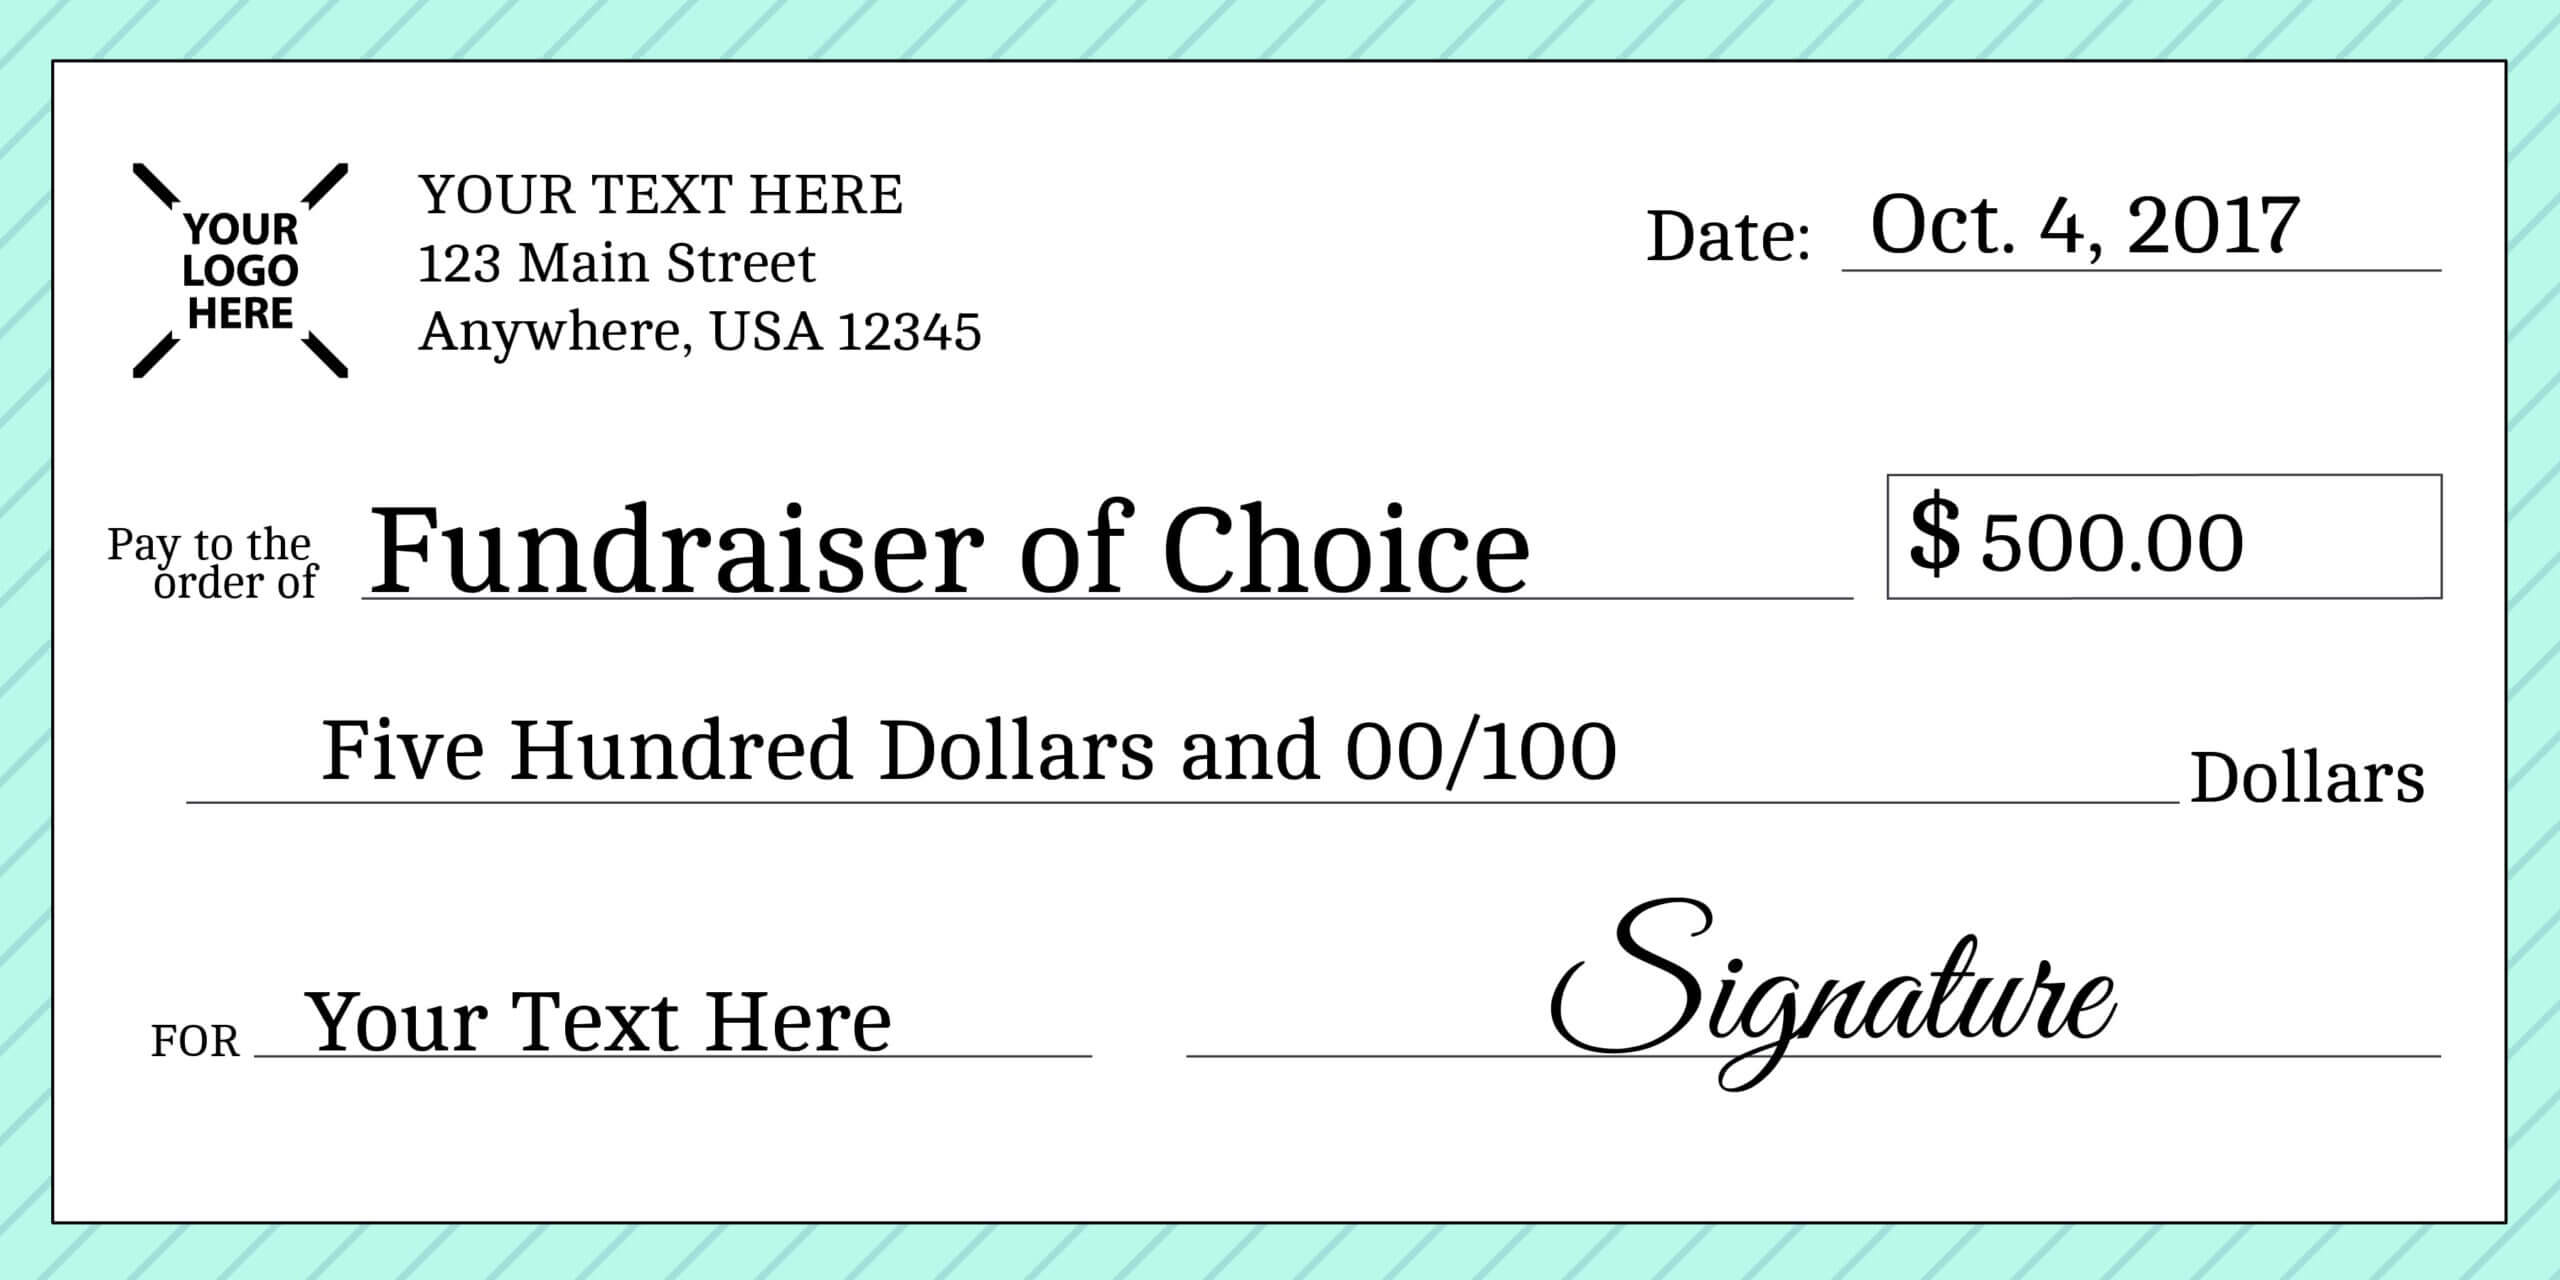 Signage 101 - Giant Check Uses And Templates | Signs Blog Within Customizable Blank Check Template